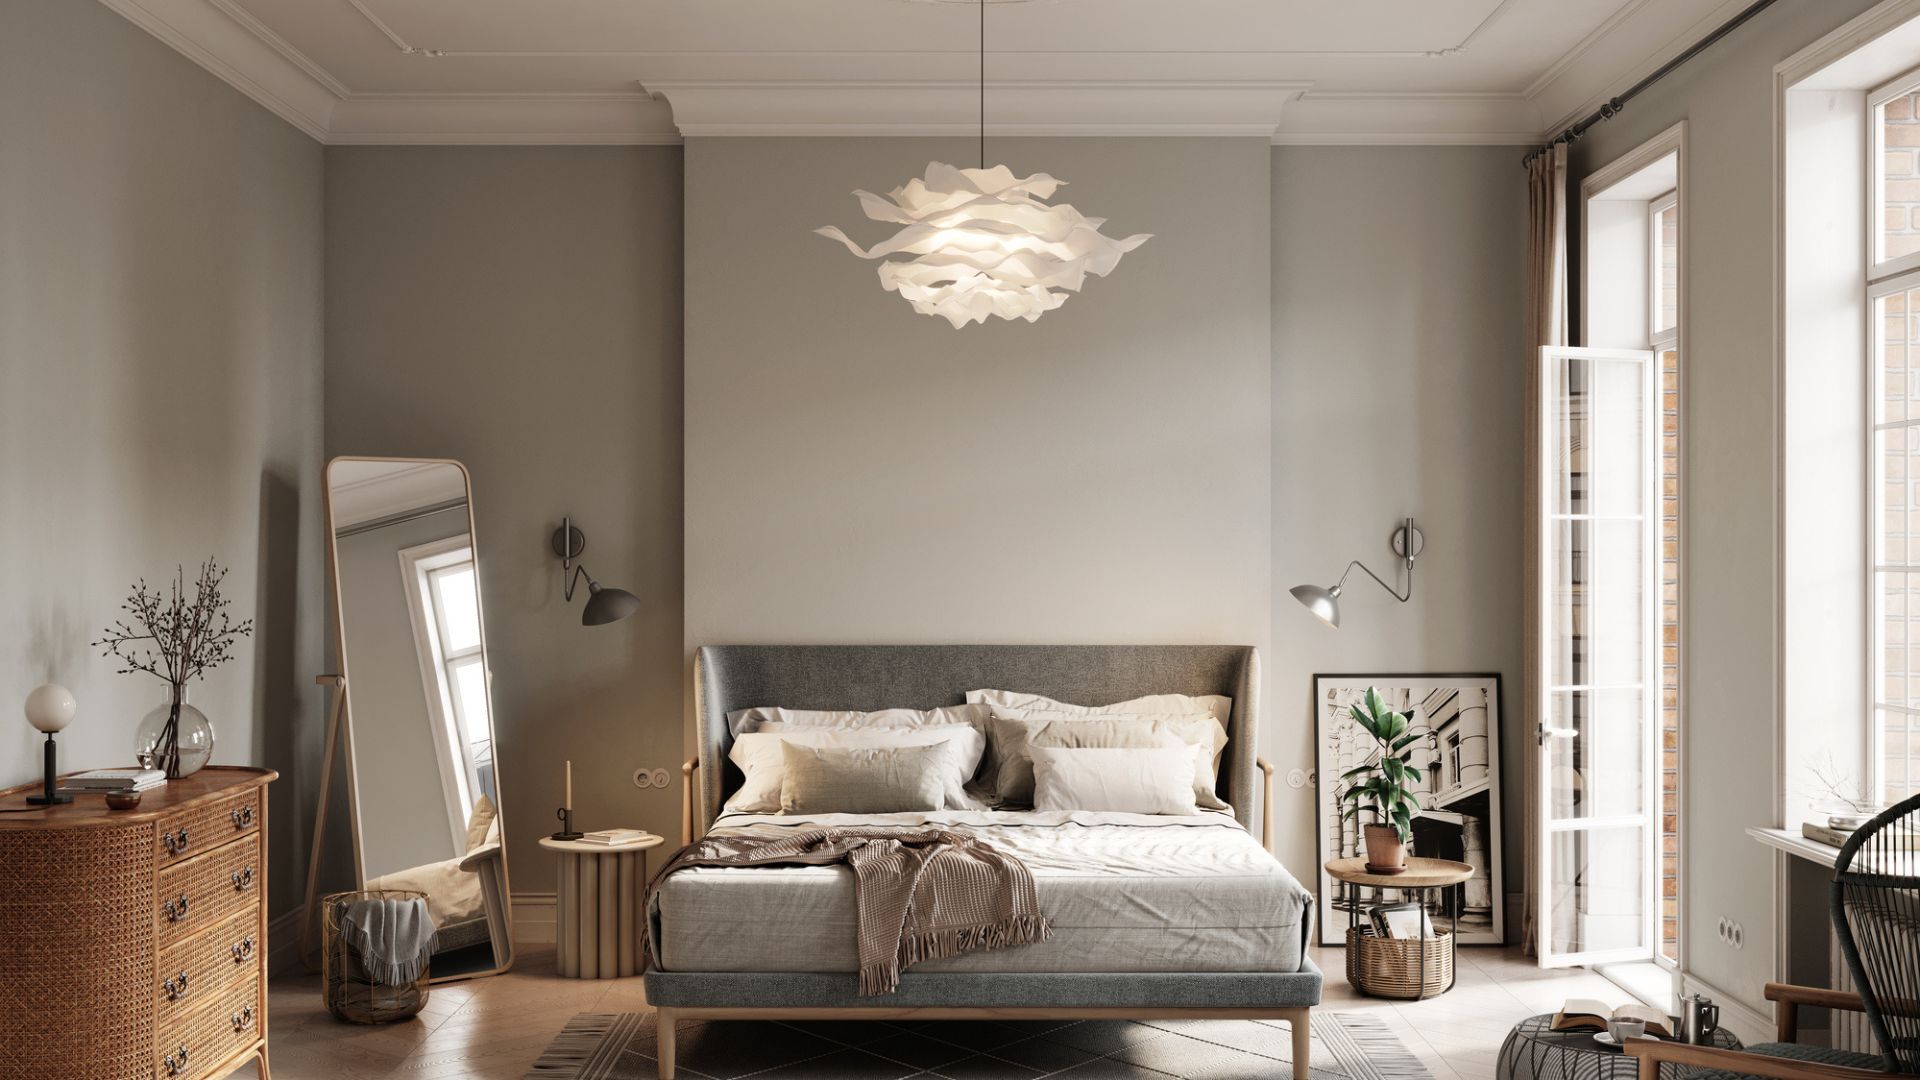 <p>                     Choose a mix of lighting to create different moods in the bedroom and give it a more considered, luxury feel – the same way as you would when looking to make a home feel cozy.                    </p>                                      <p>                     Georgia reveals, “Hotels put a lot of thought into the lighting in their rooms, so layer your bedroom lighting with low-level table lights on the bedside tables, as well as a central ceiling chandelier, and also include wall lights and large mirrors to add a cozy, inviting feel that works both day and night.”                   </p>